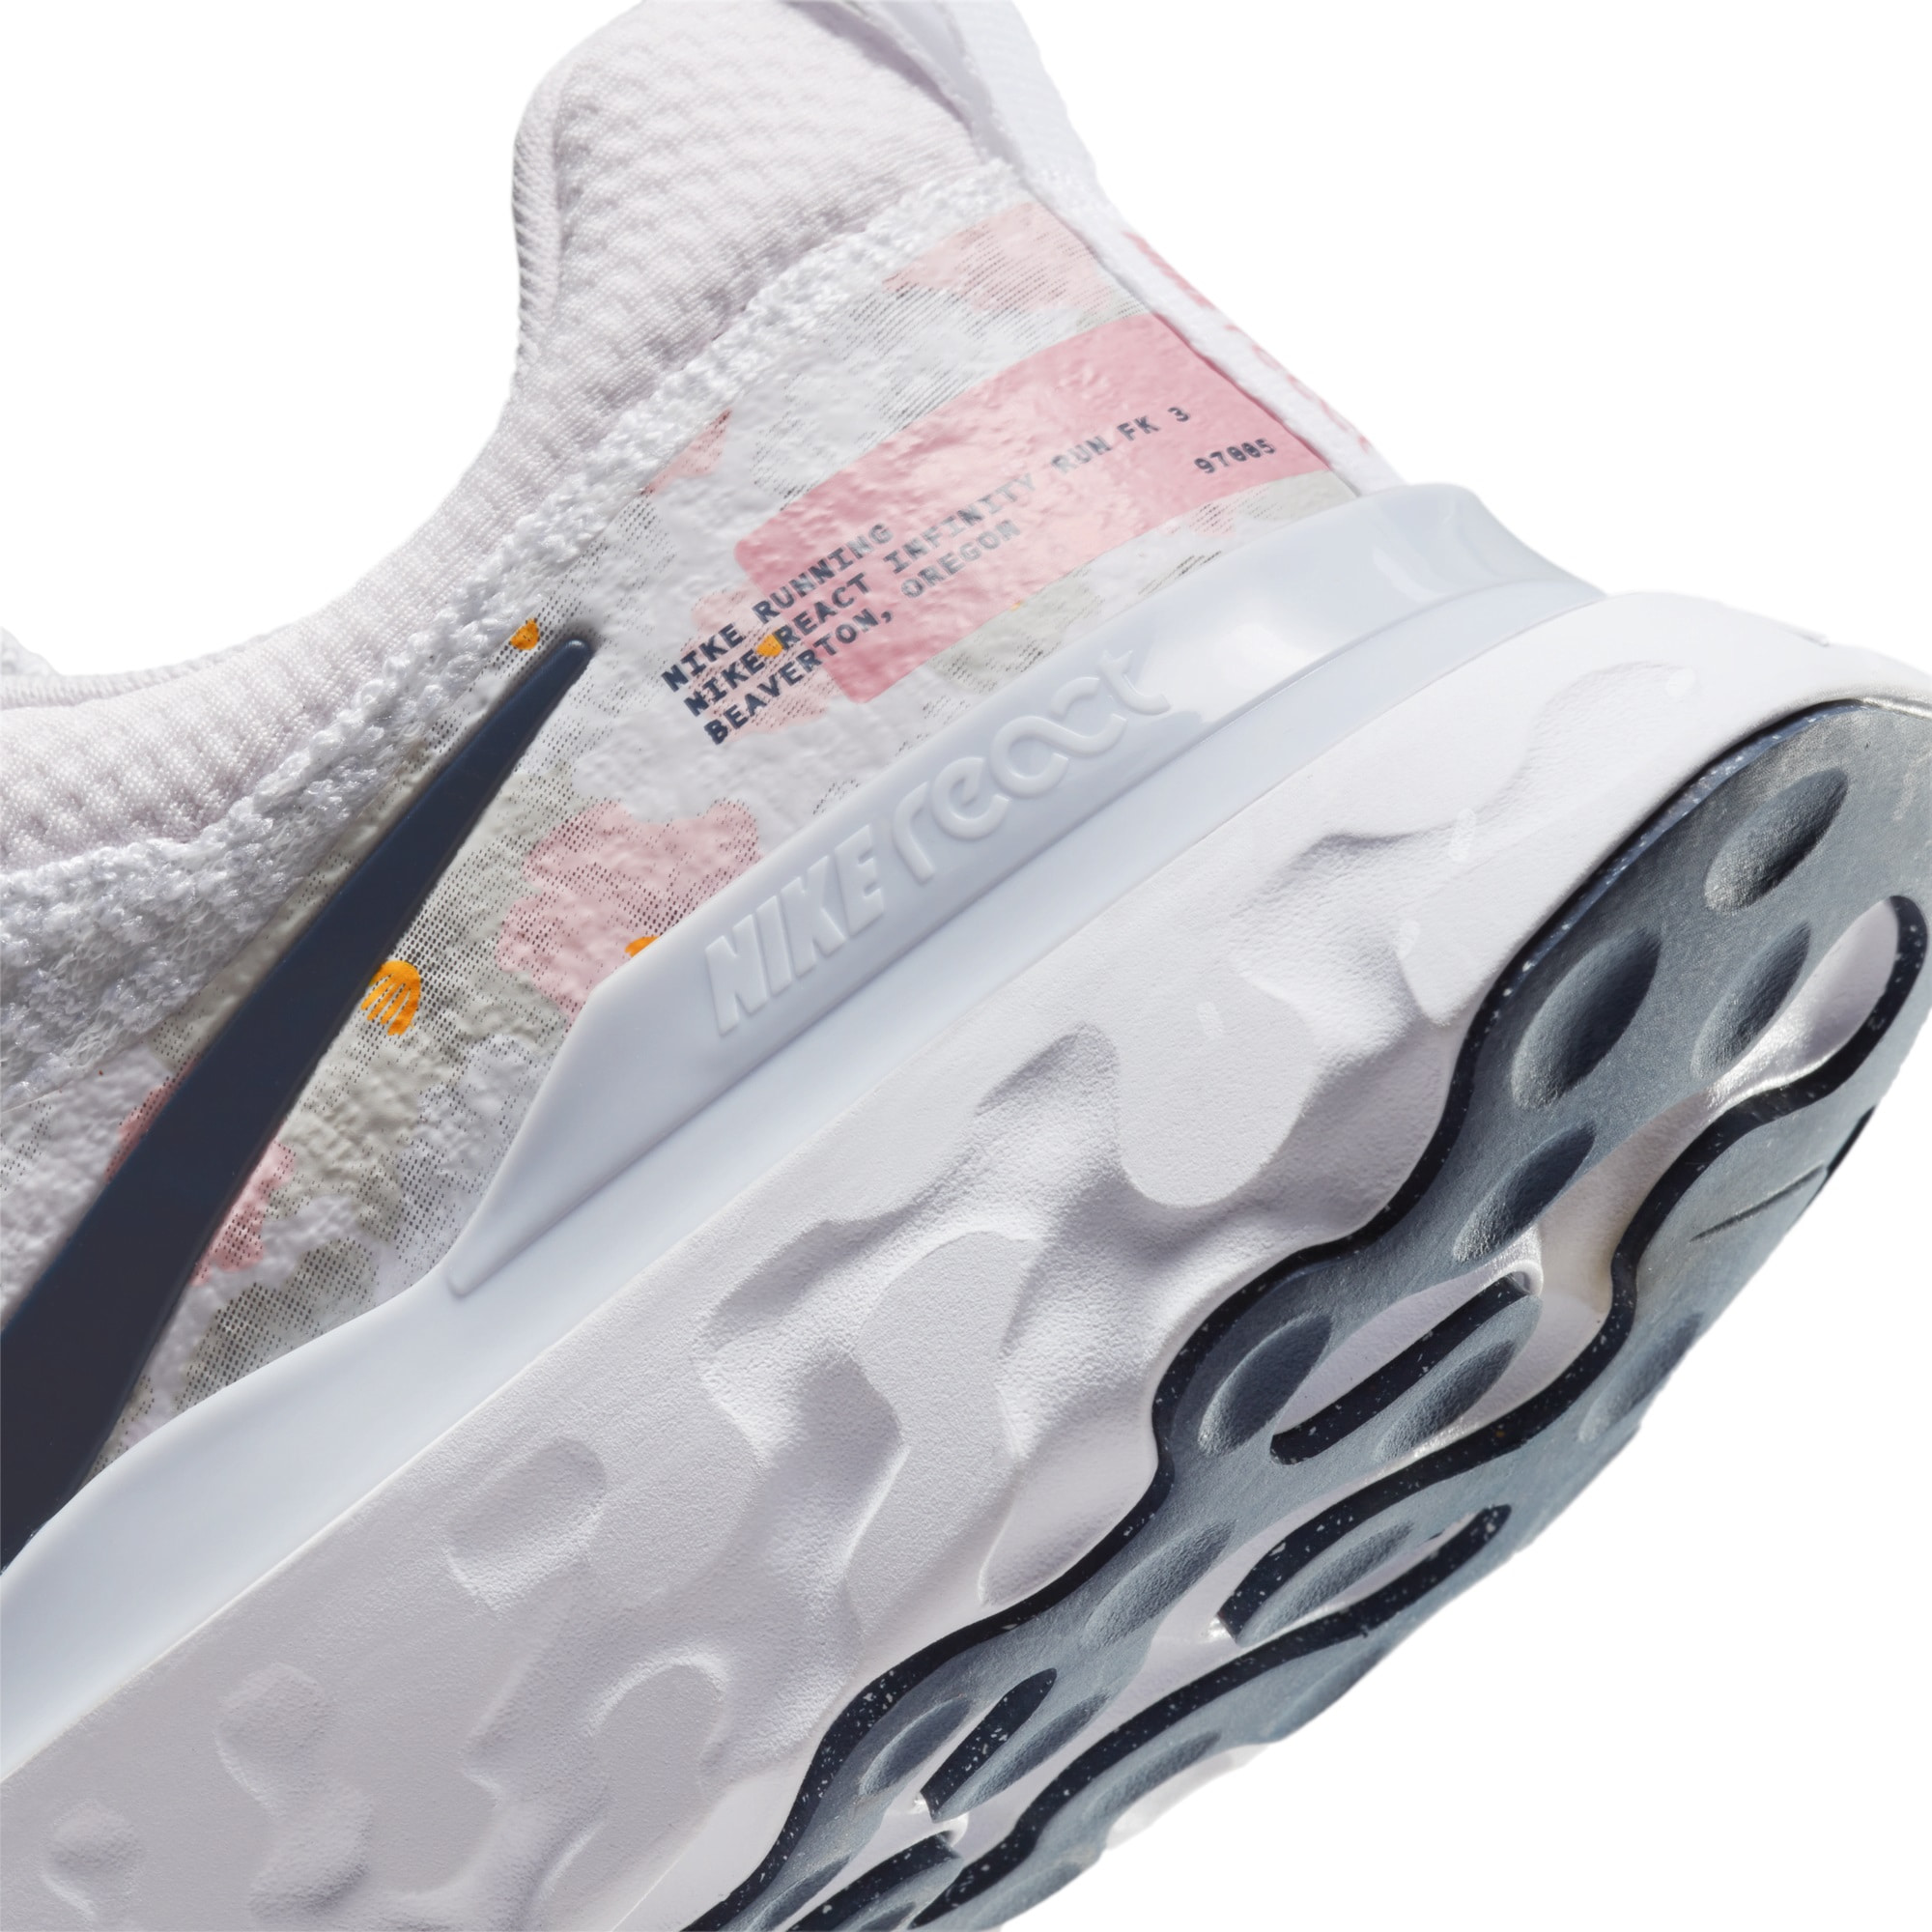 GIÀY THỂ THAO NIKE NỮ REACT INFINITY 3 PREMIUM WHITE PEARL PINK WOMENS ROAD RUNNING SHOES FD4151-100 8